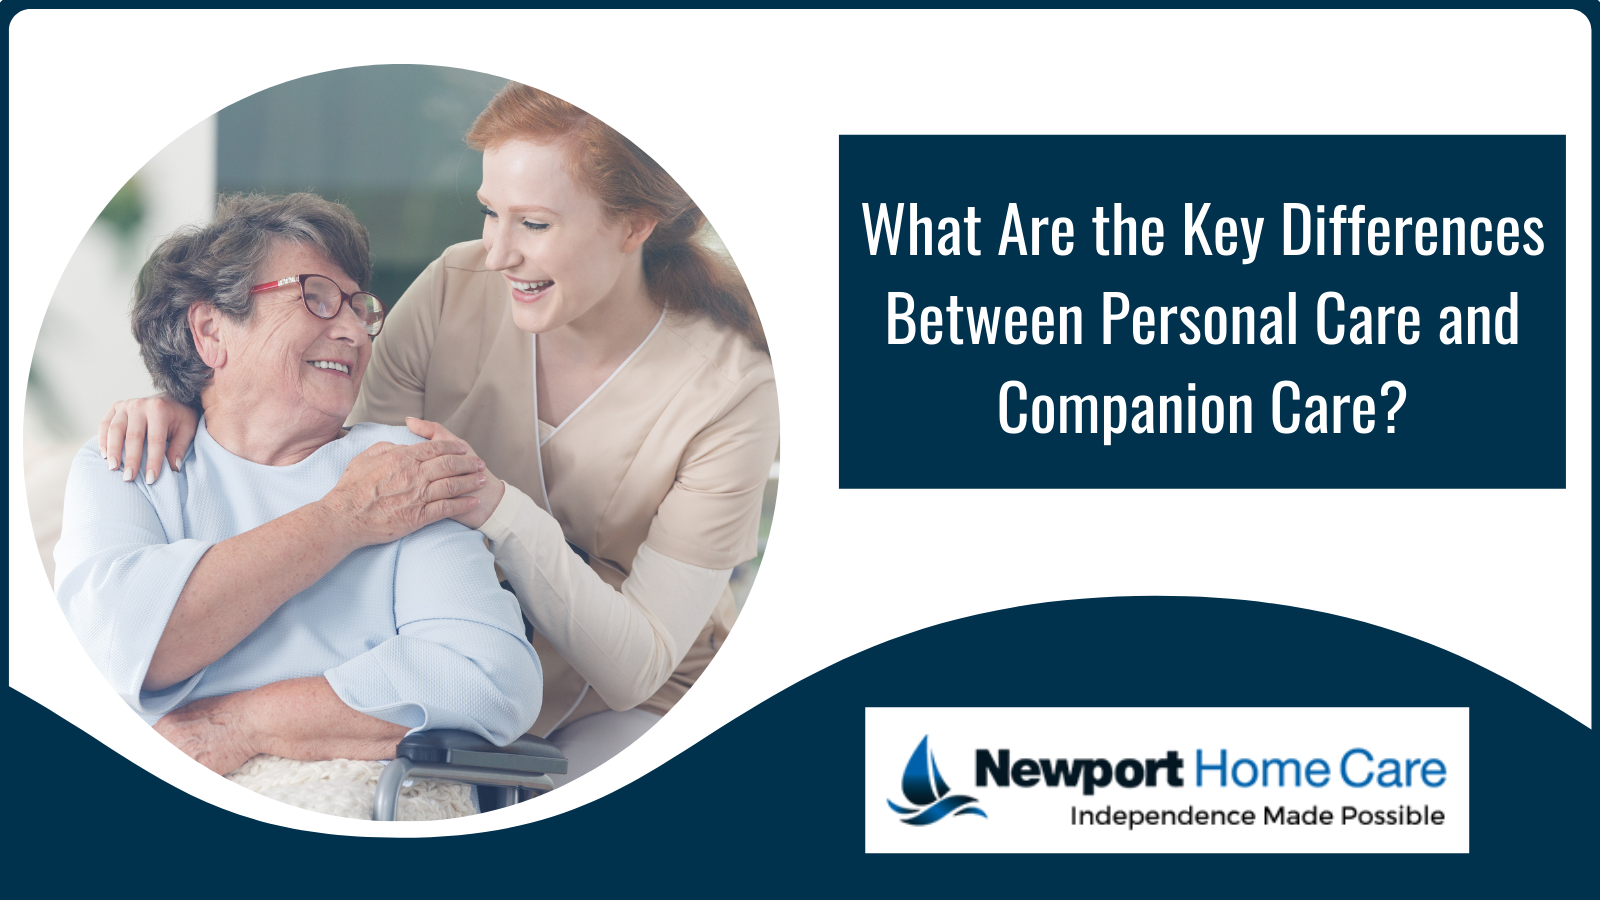 What Are the Key Differences Between Personal Care and Companion Care?